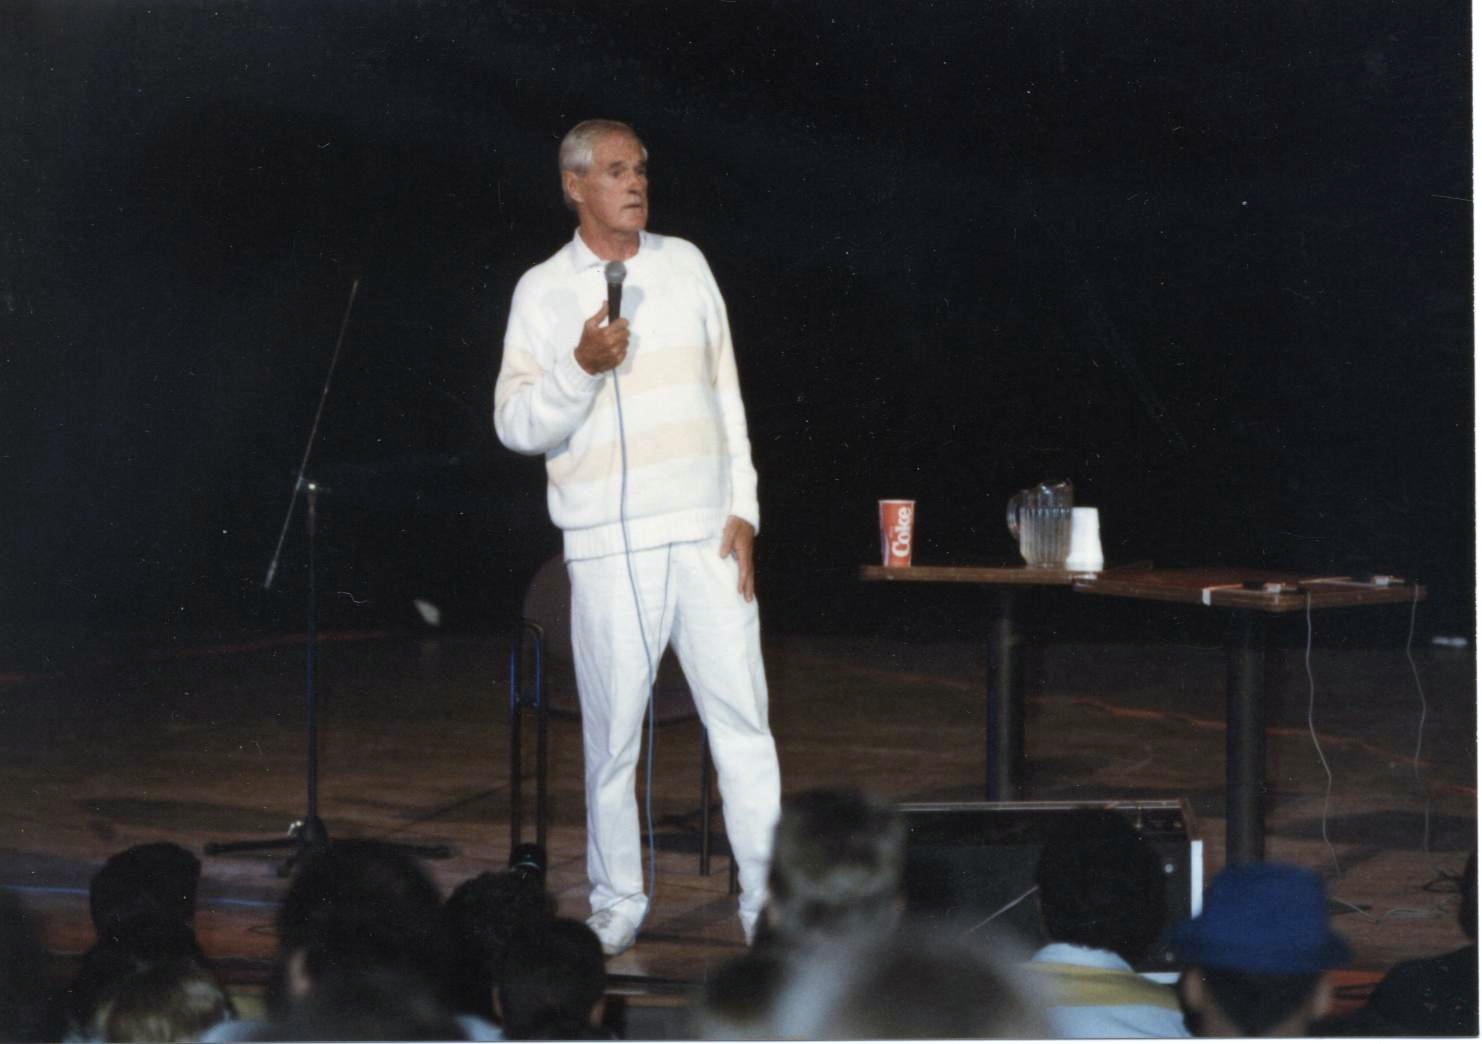 [Dr. Timothy Leary, Liberty Hall, Lawrence, Kansas. Dr. Timothy's performance at the River City Union, September 12, 1987. Photograph by Doug L. Miller: used with permission]